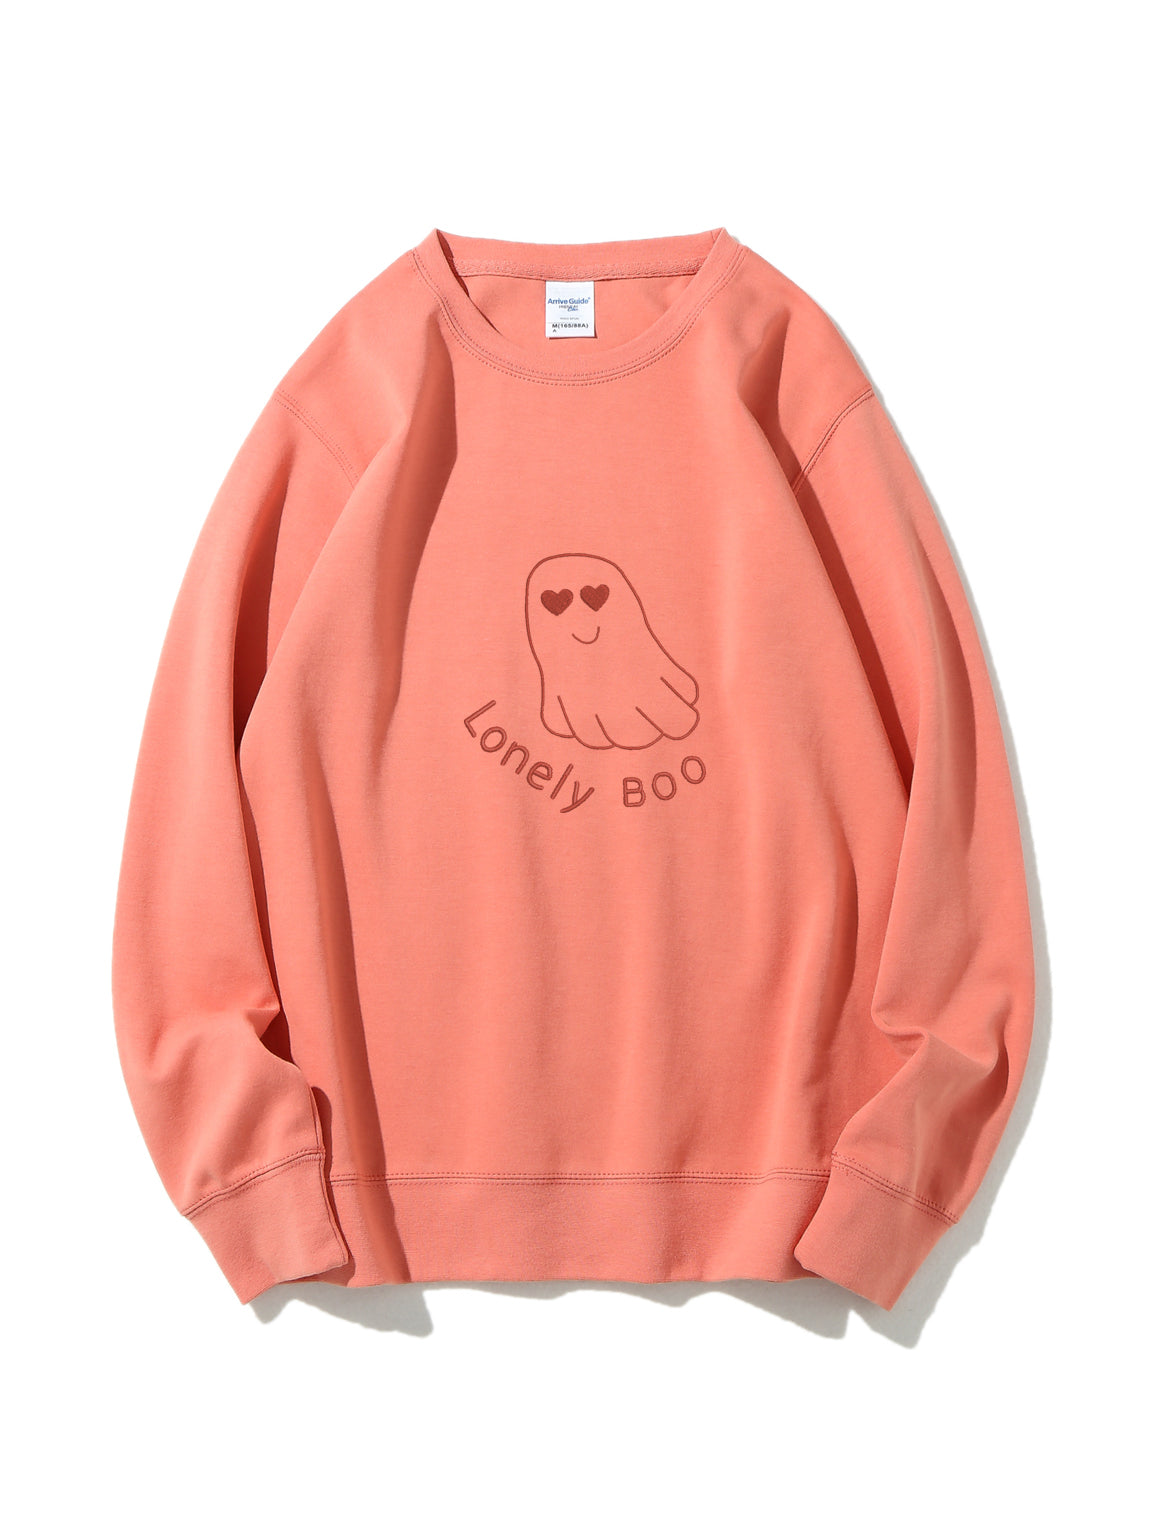 👻Halloween Best Matching Couples Embroidered Hoodie/Crewneck 👻